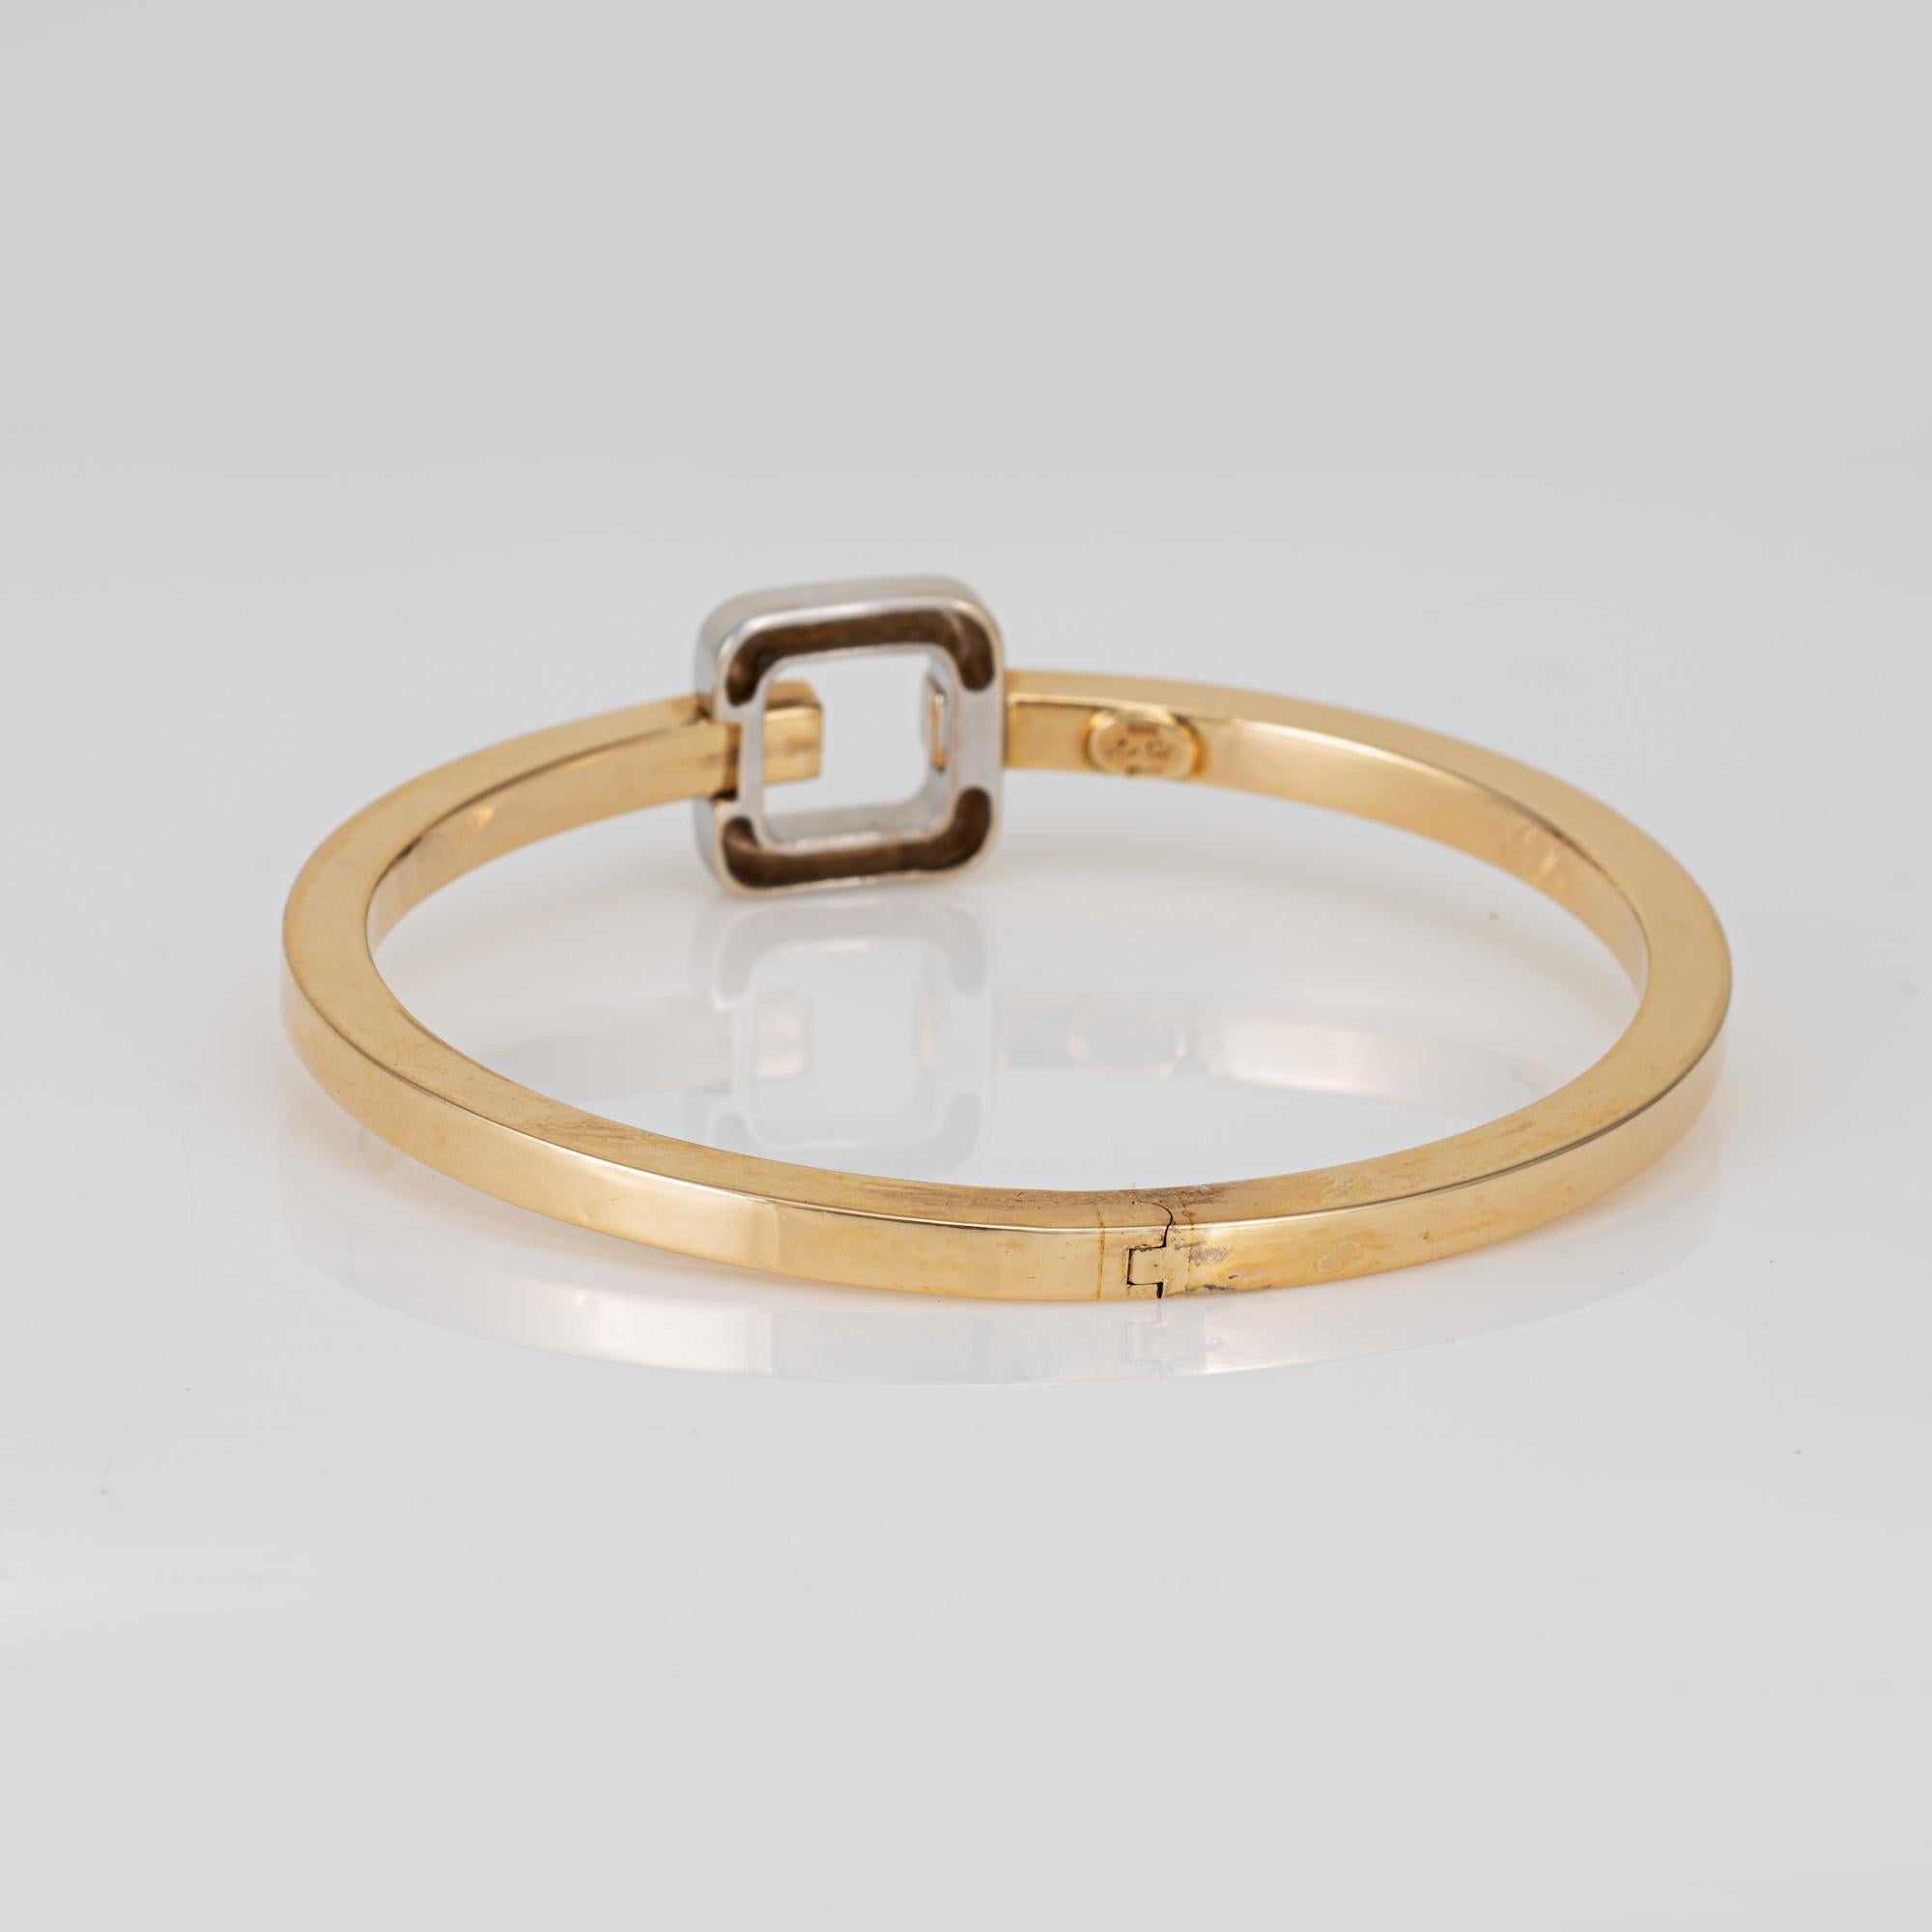 Stylish estate two-tone bangle bracelet crafted in 14 karat yellow & white gold. 

Sleek in design, the Italian made bangle easily slips on and off the wrist. Great for wear alone or stacking. 

The bracelet is in good condition and was lightly